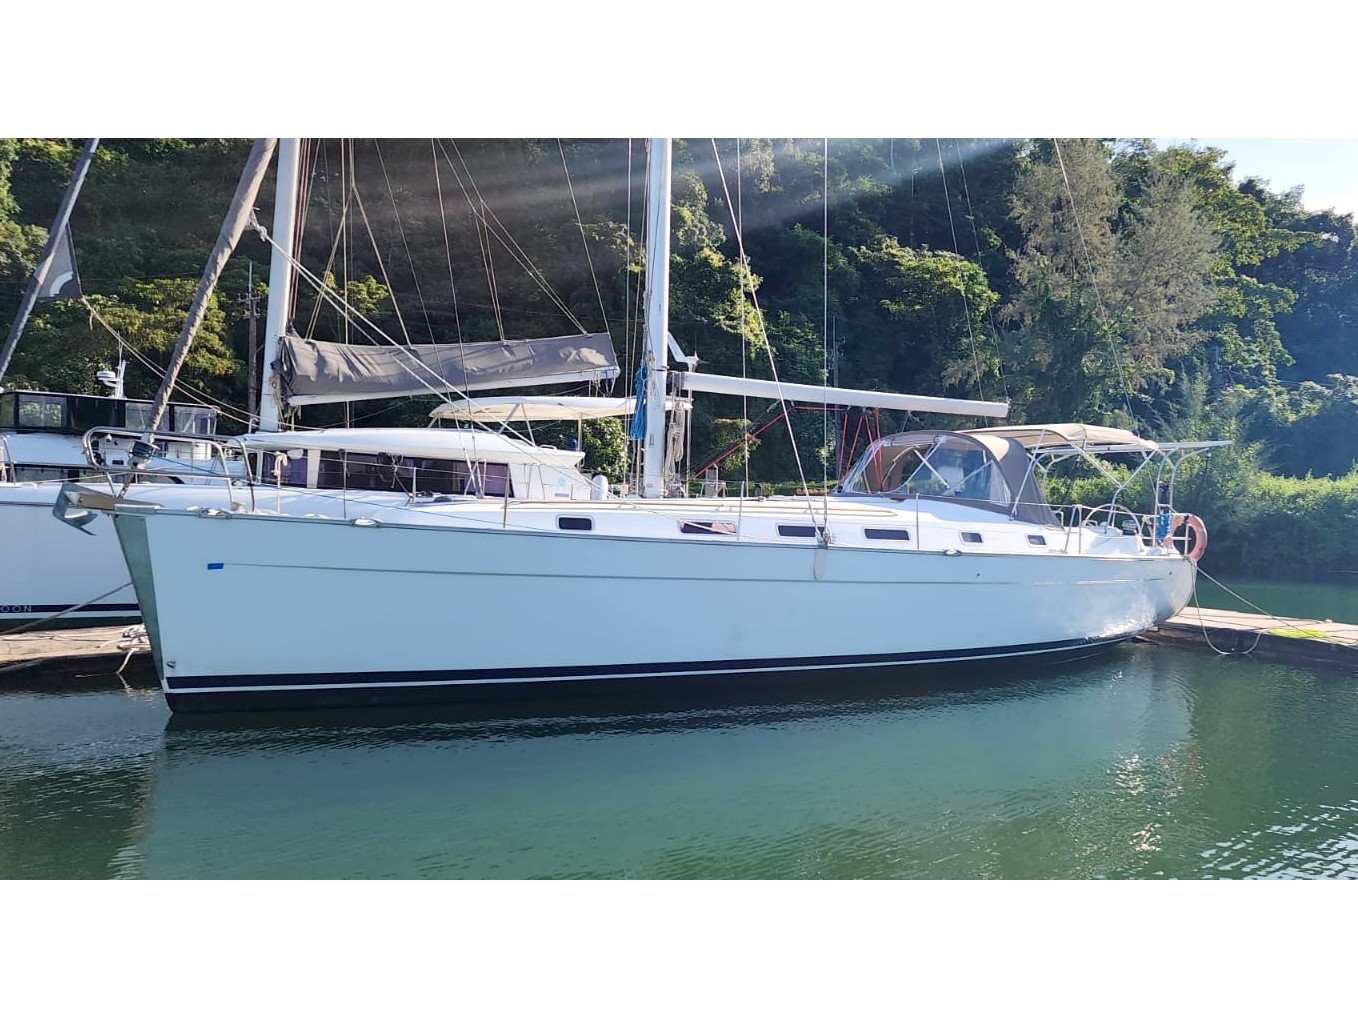 Cyclades 43.4 - Sailboat Charter Thailand & Boat hire in Thailand Koh Chang Ao Salak Phet 2